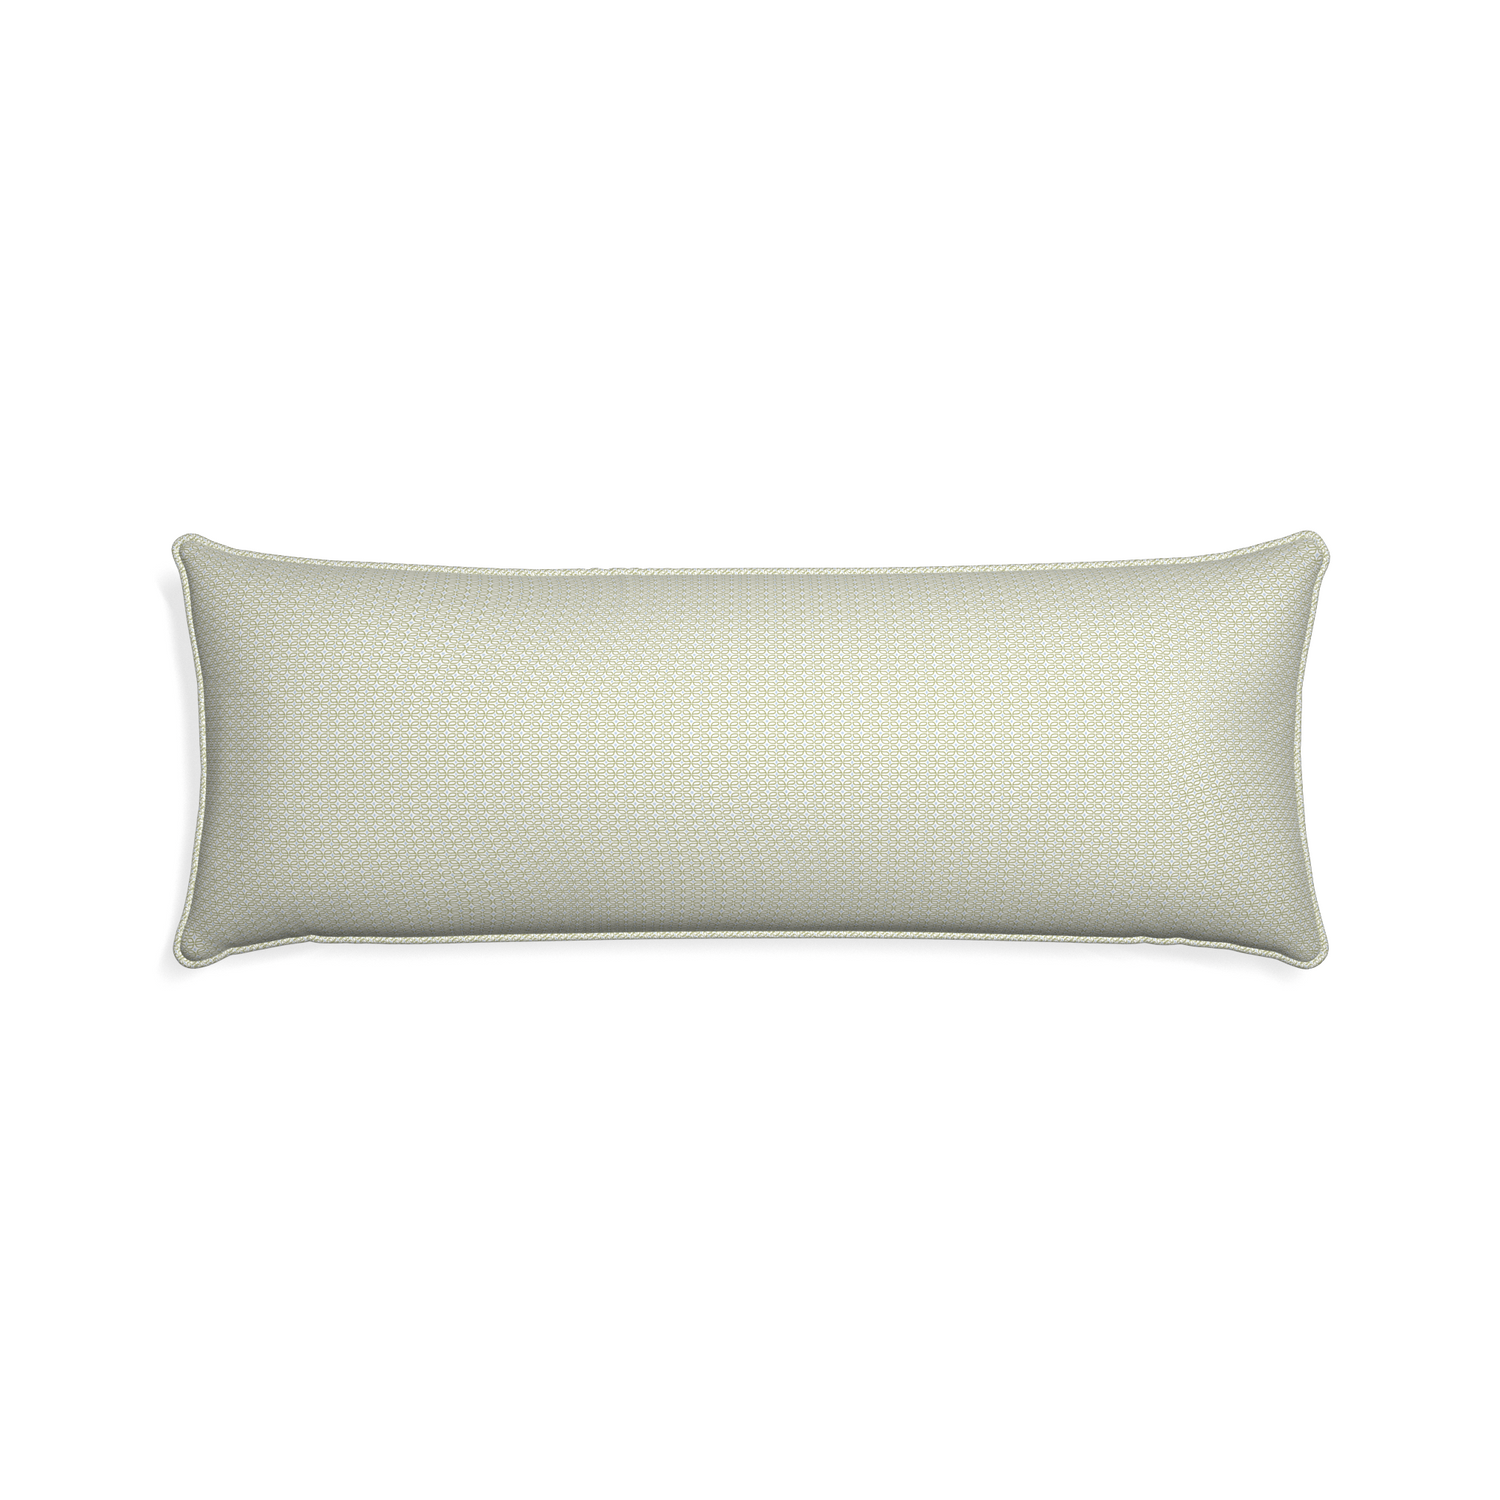 Xl-lumbar loomi moss custom pillow with l piping on white background